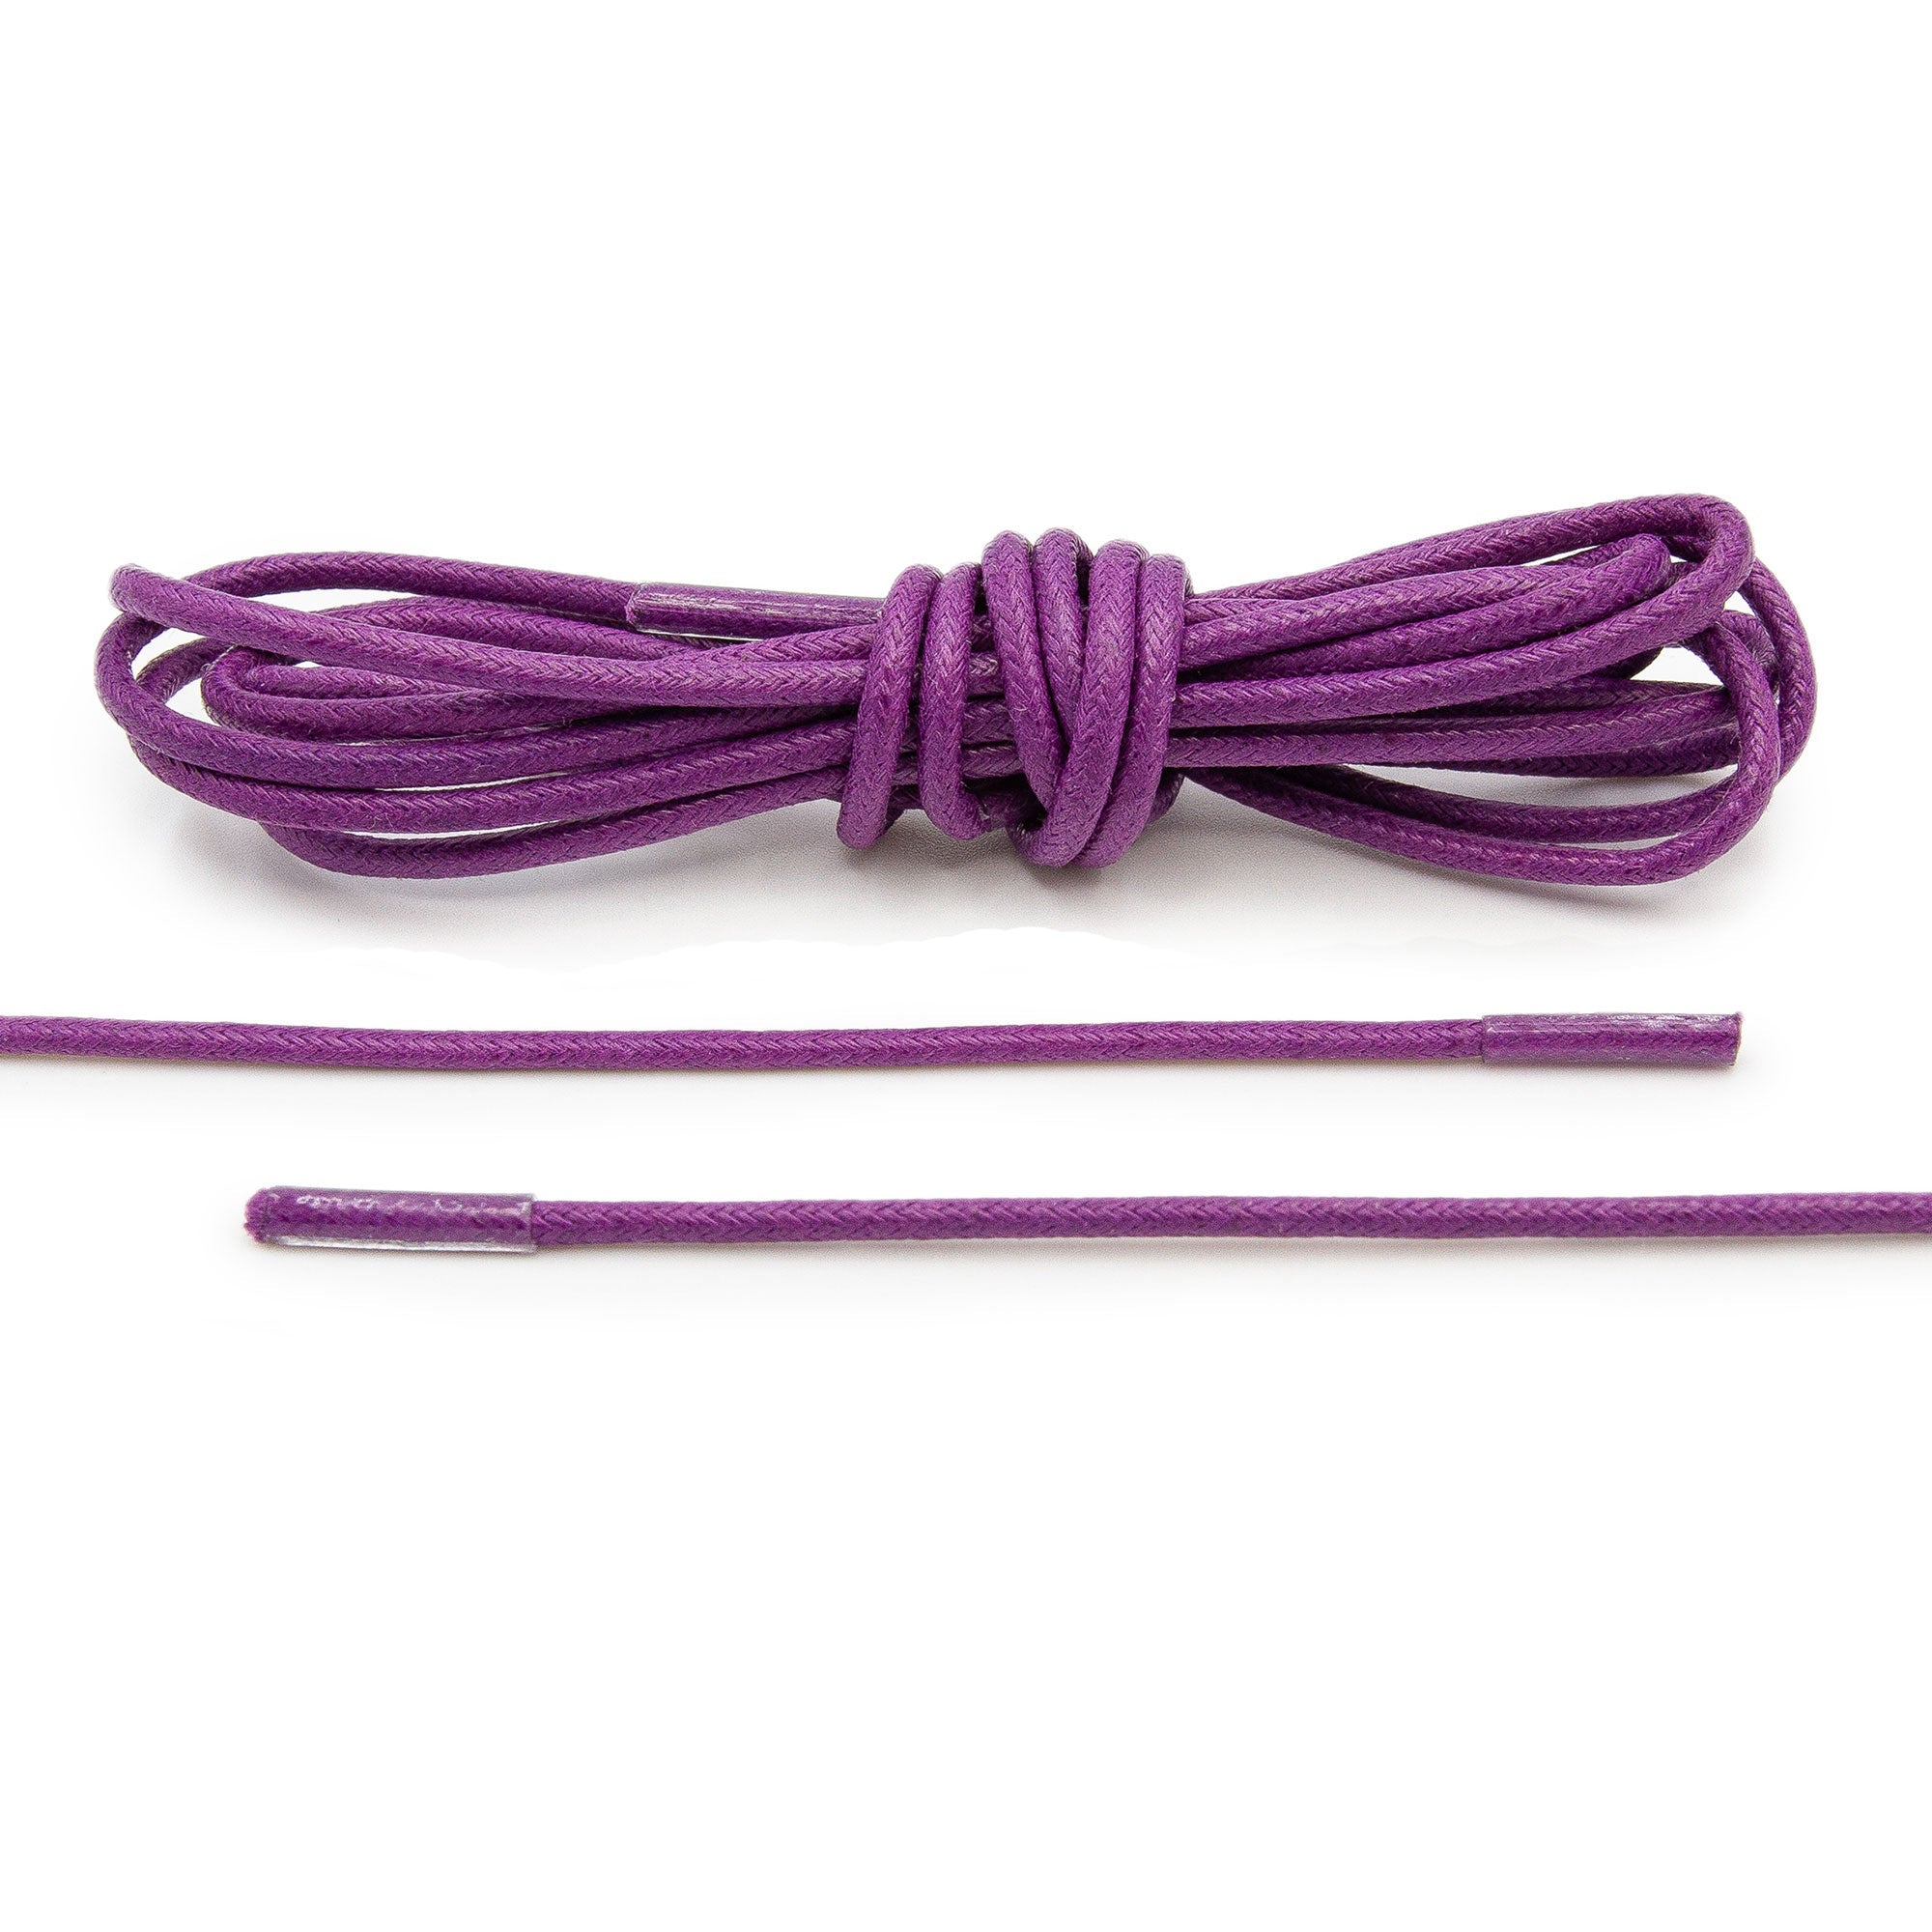 Violet Waxed Dress Shoelaces - Angelus Direct